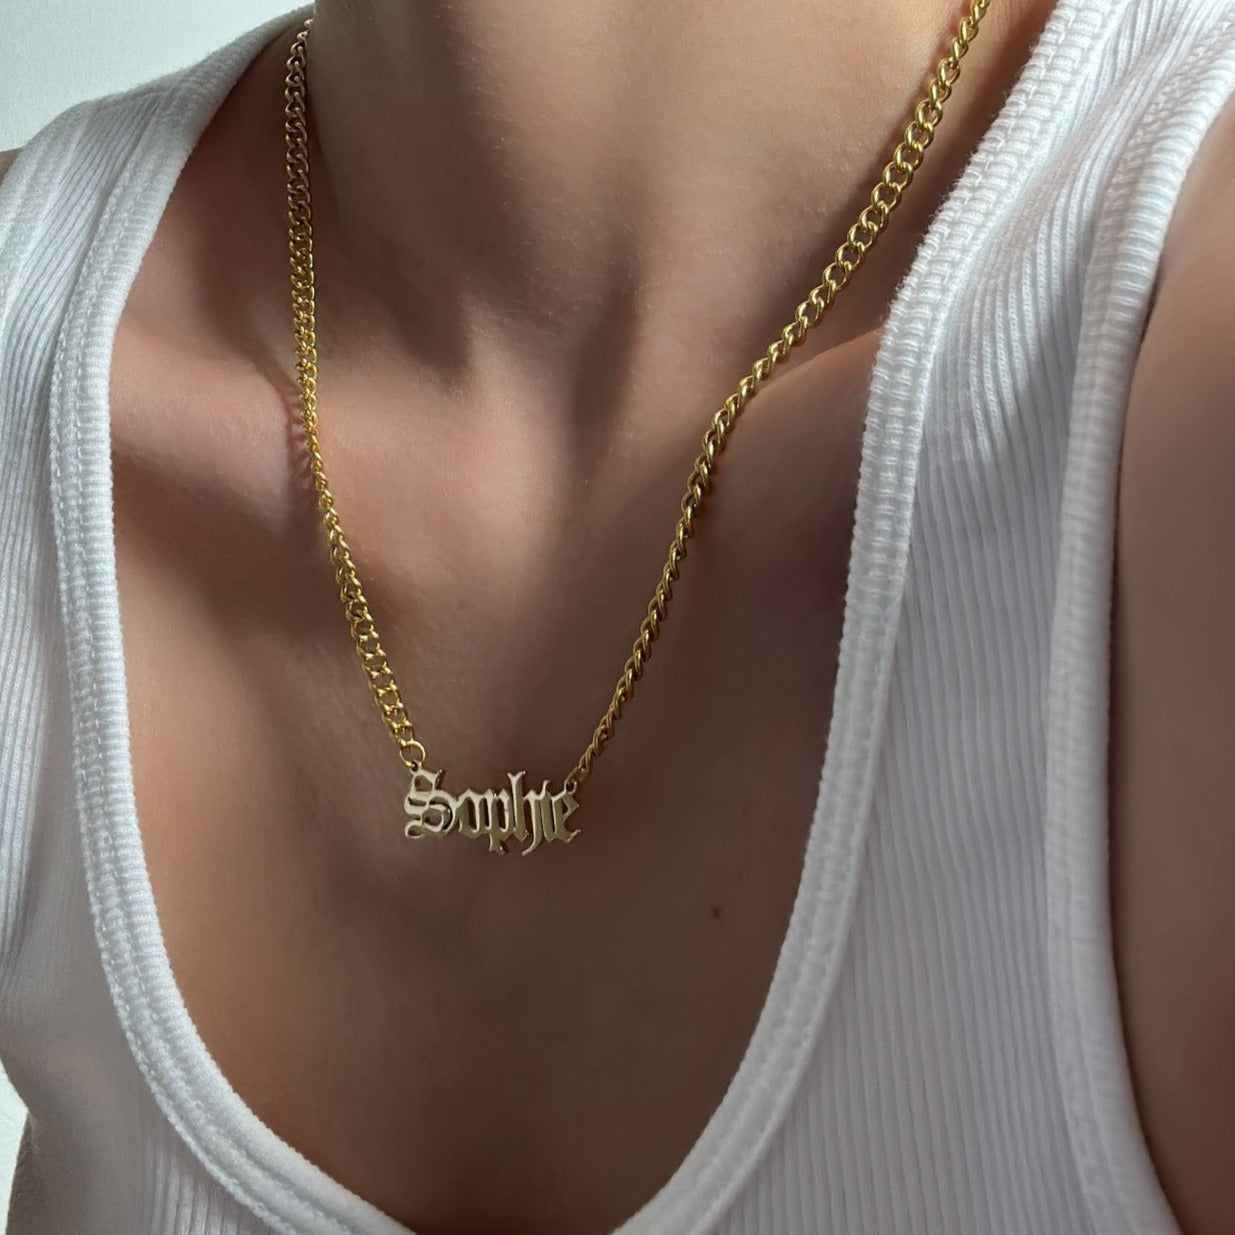 PERSONALISED BOLD CHAIN NAME NECKLACE